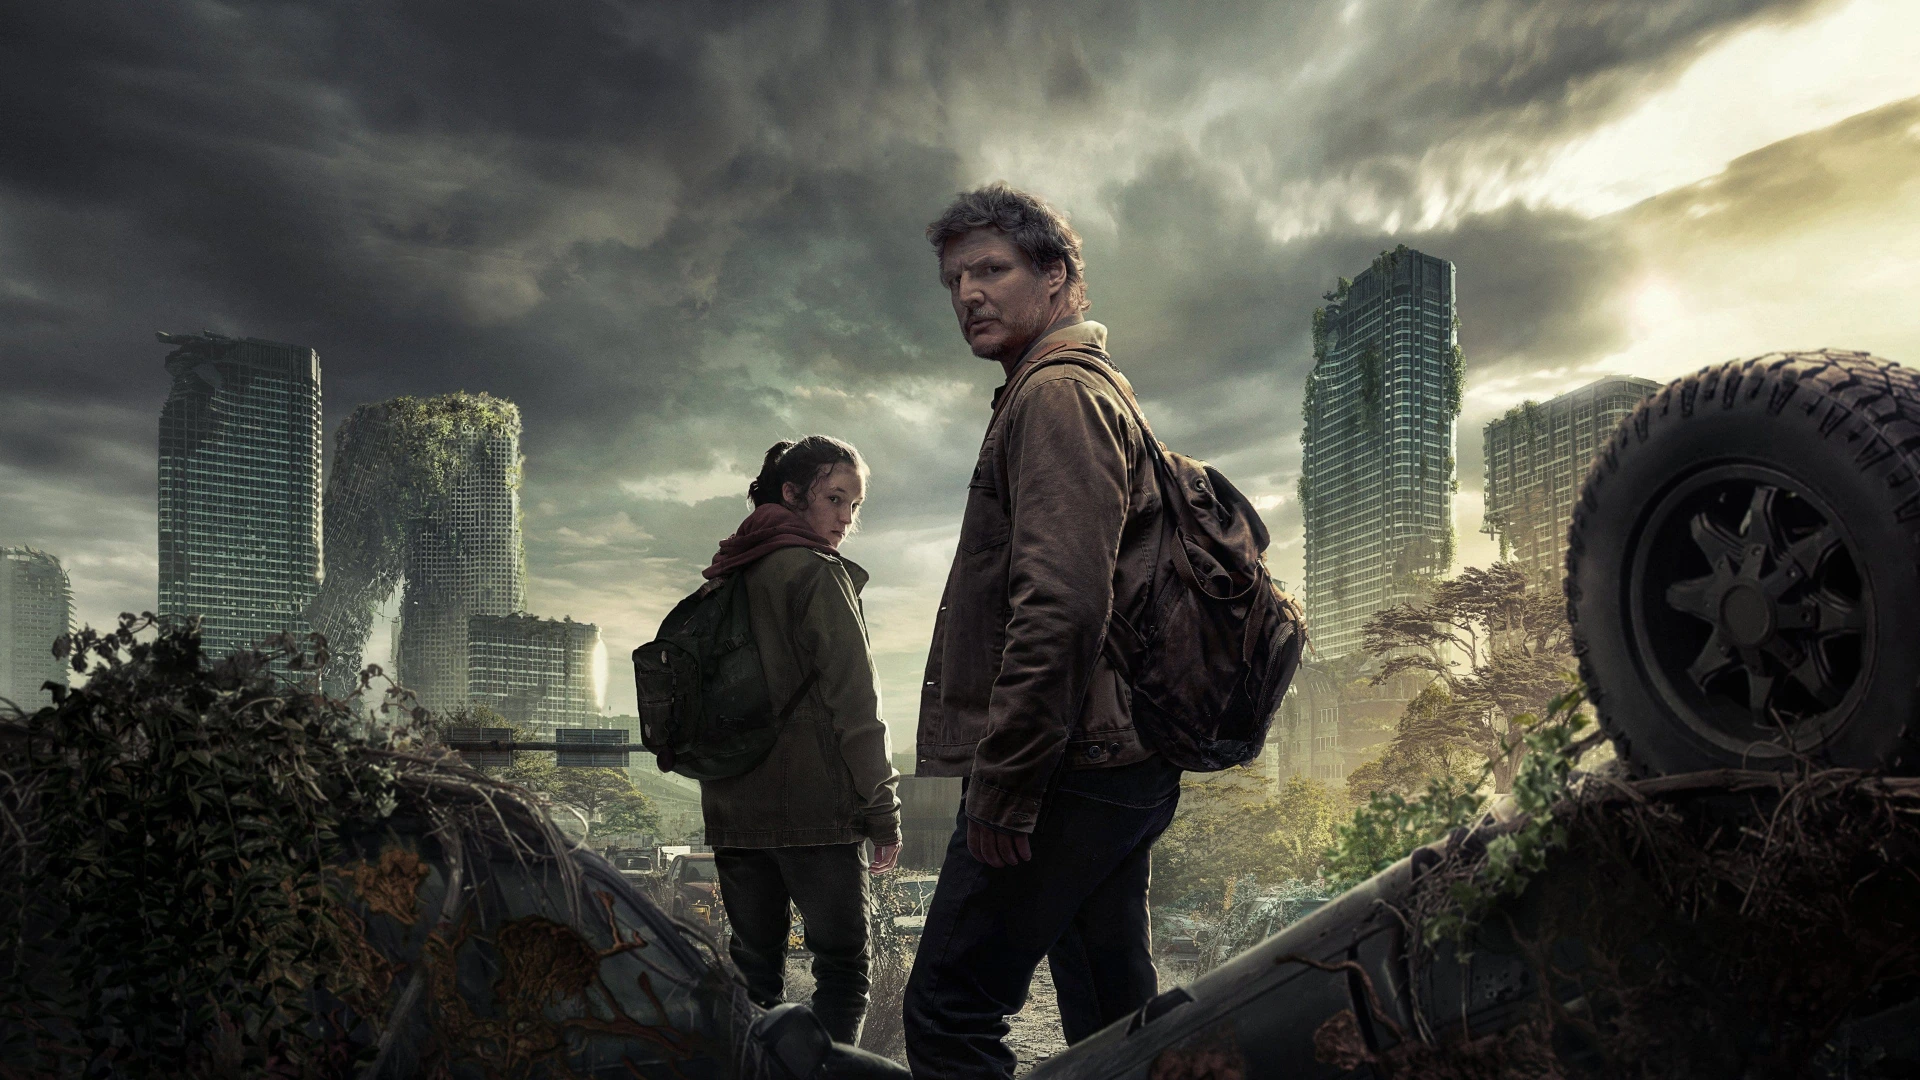 Imdb Last Of Us The first episode of The Last of Us on HBO is rated 9.5 on IMDb |  gagadget.com